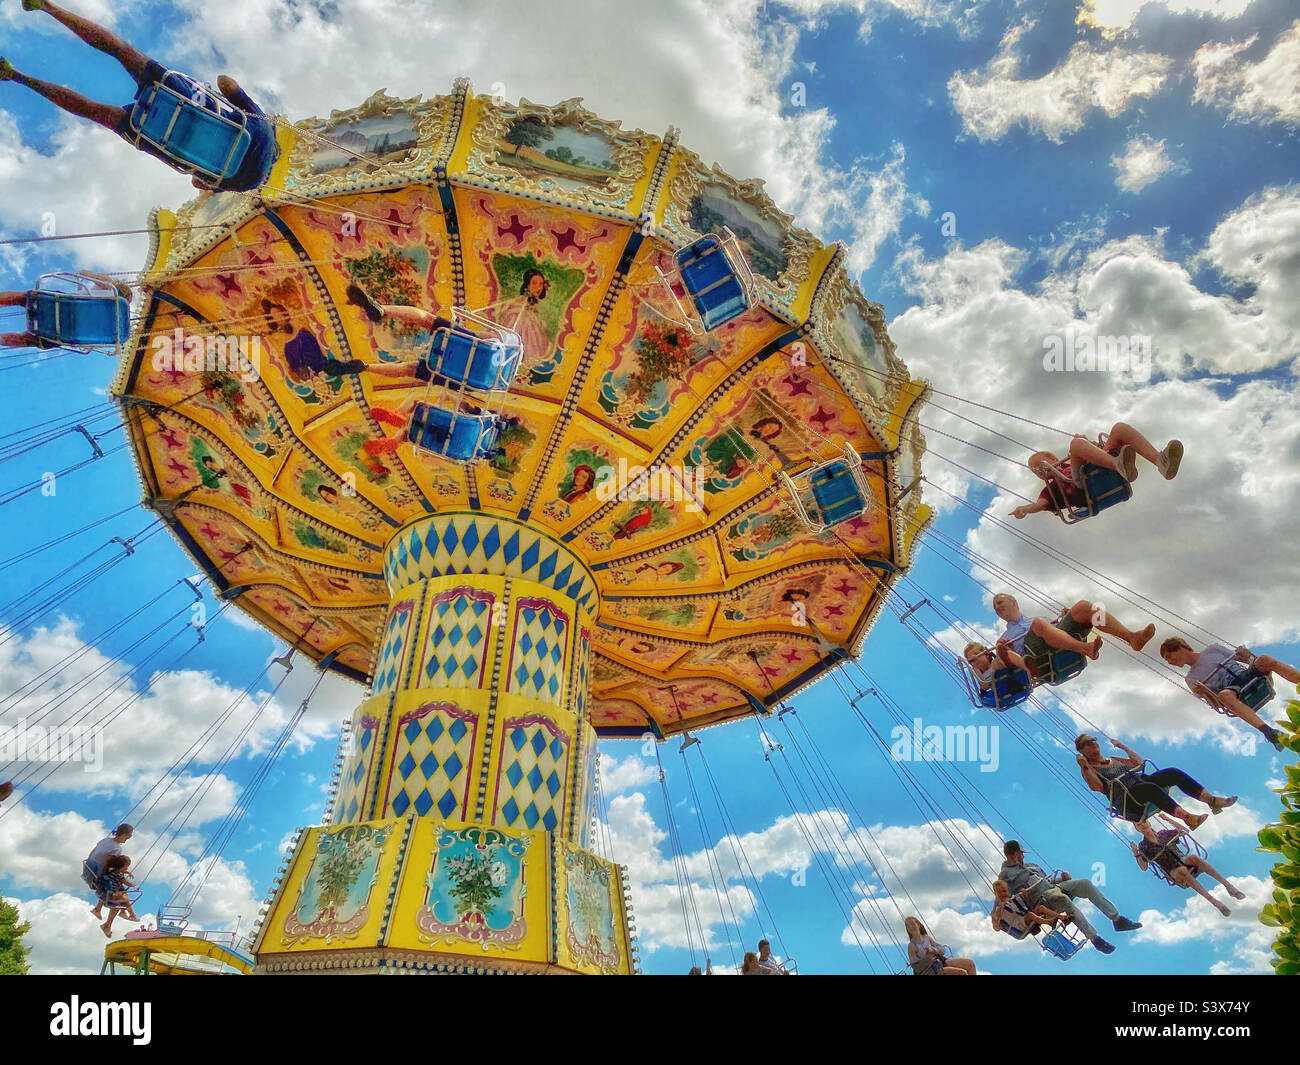 Happy people riding on a “chair o plane” or swing ride at a funfair. It’s summer holidays and time to relax and have fun! Photo ©️ COLIN HOSKINS. Stock Photo